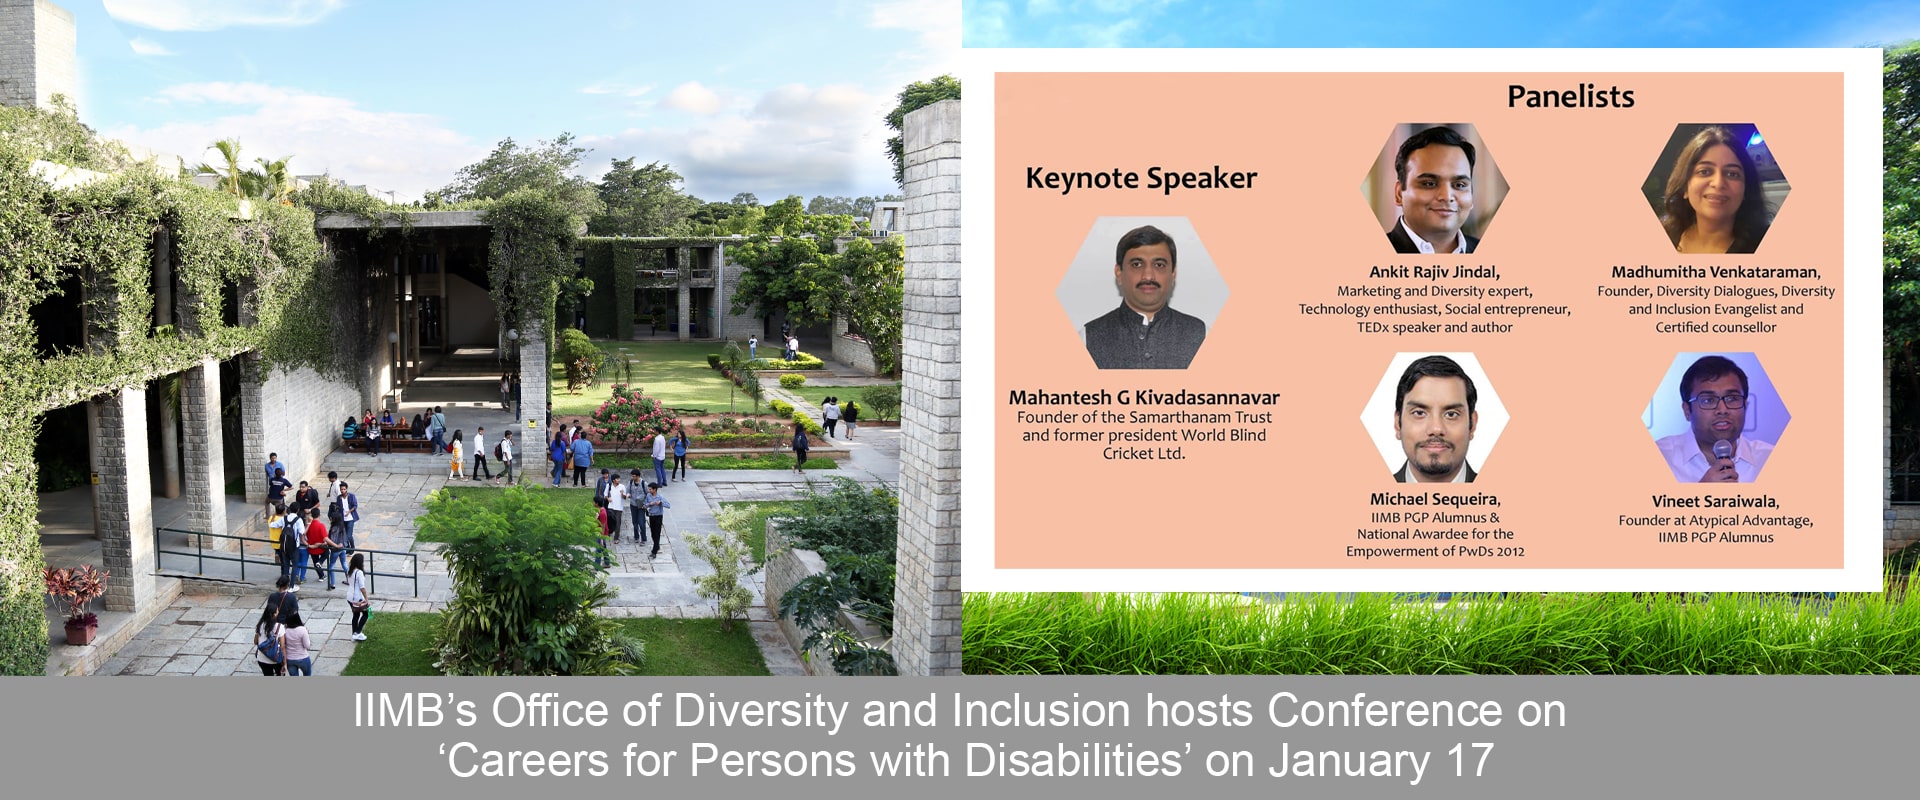 IIMB’s Office of Diversity and Inclusion hosts Conference on ‘Careers for Persons with Disabilities’ on January 17